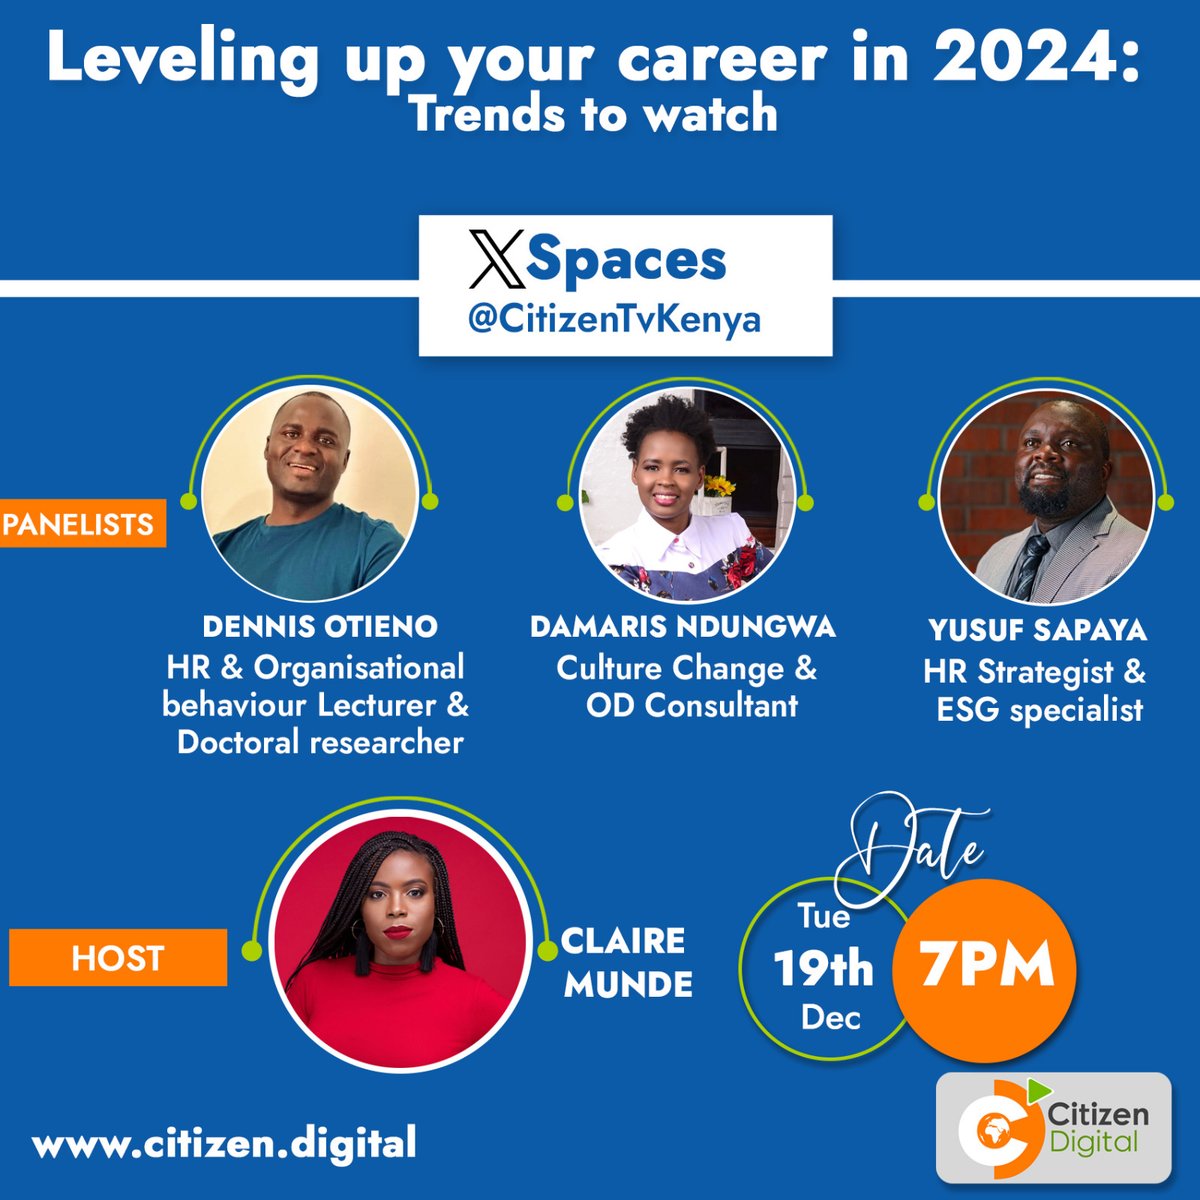 As the end of the year draws near, many are looking back to see whether they achieved their goals & looking for growth opportunities. Listen to #CitizenDigital #XSpaces this Tuesday as we take stock of the year & discuss work trends for 2024. Hosted by @Clairedudieu